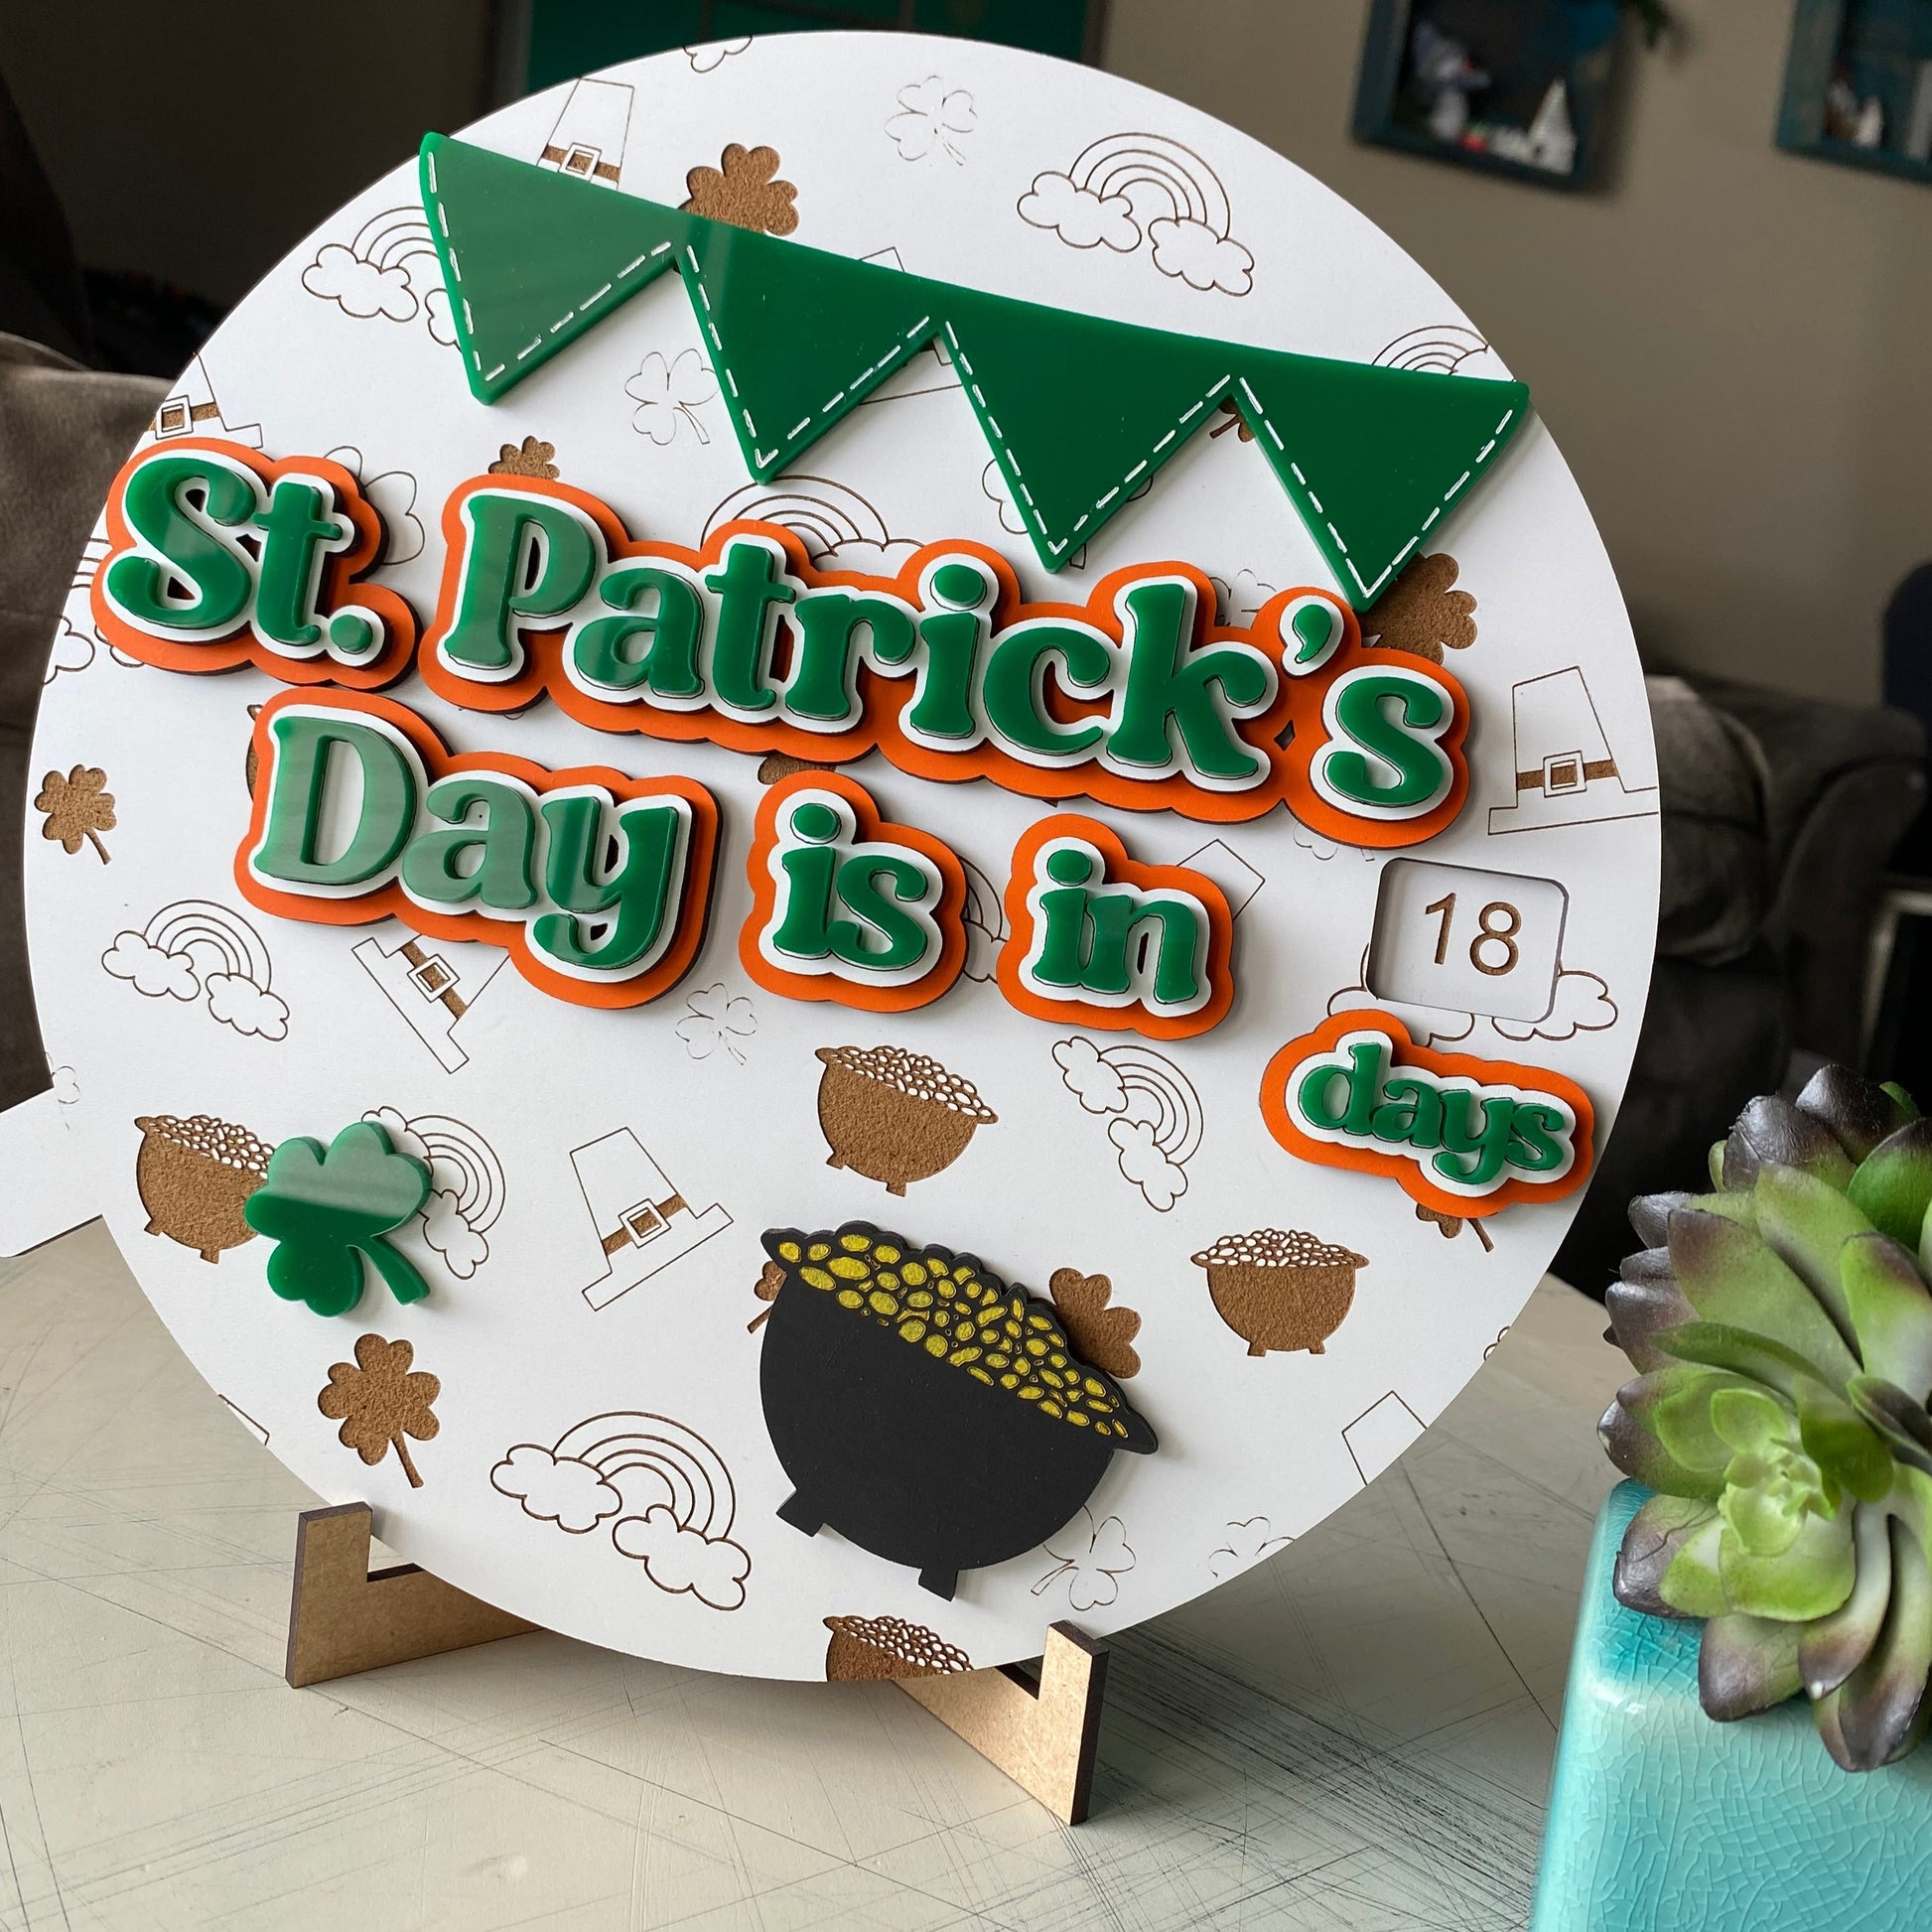 St. Patrick's Day countdown sign - Novotny Designs - countdown with self-contained numbers